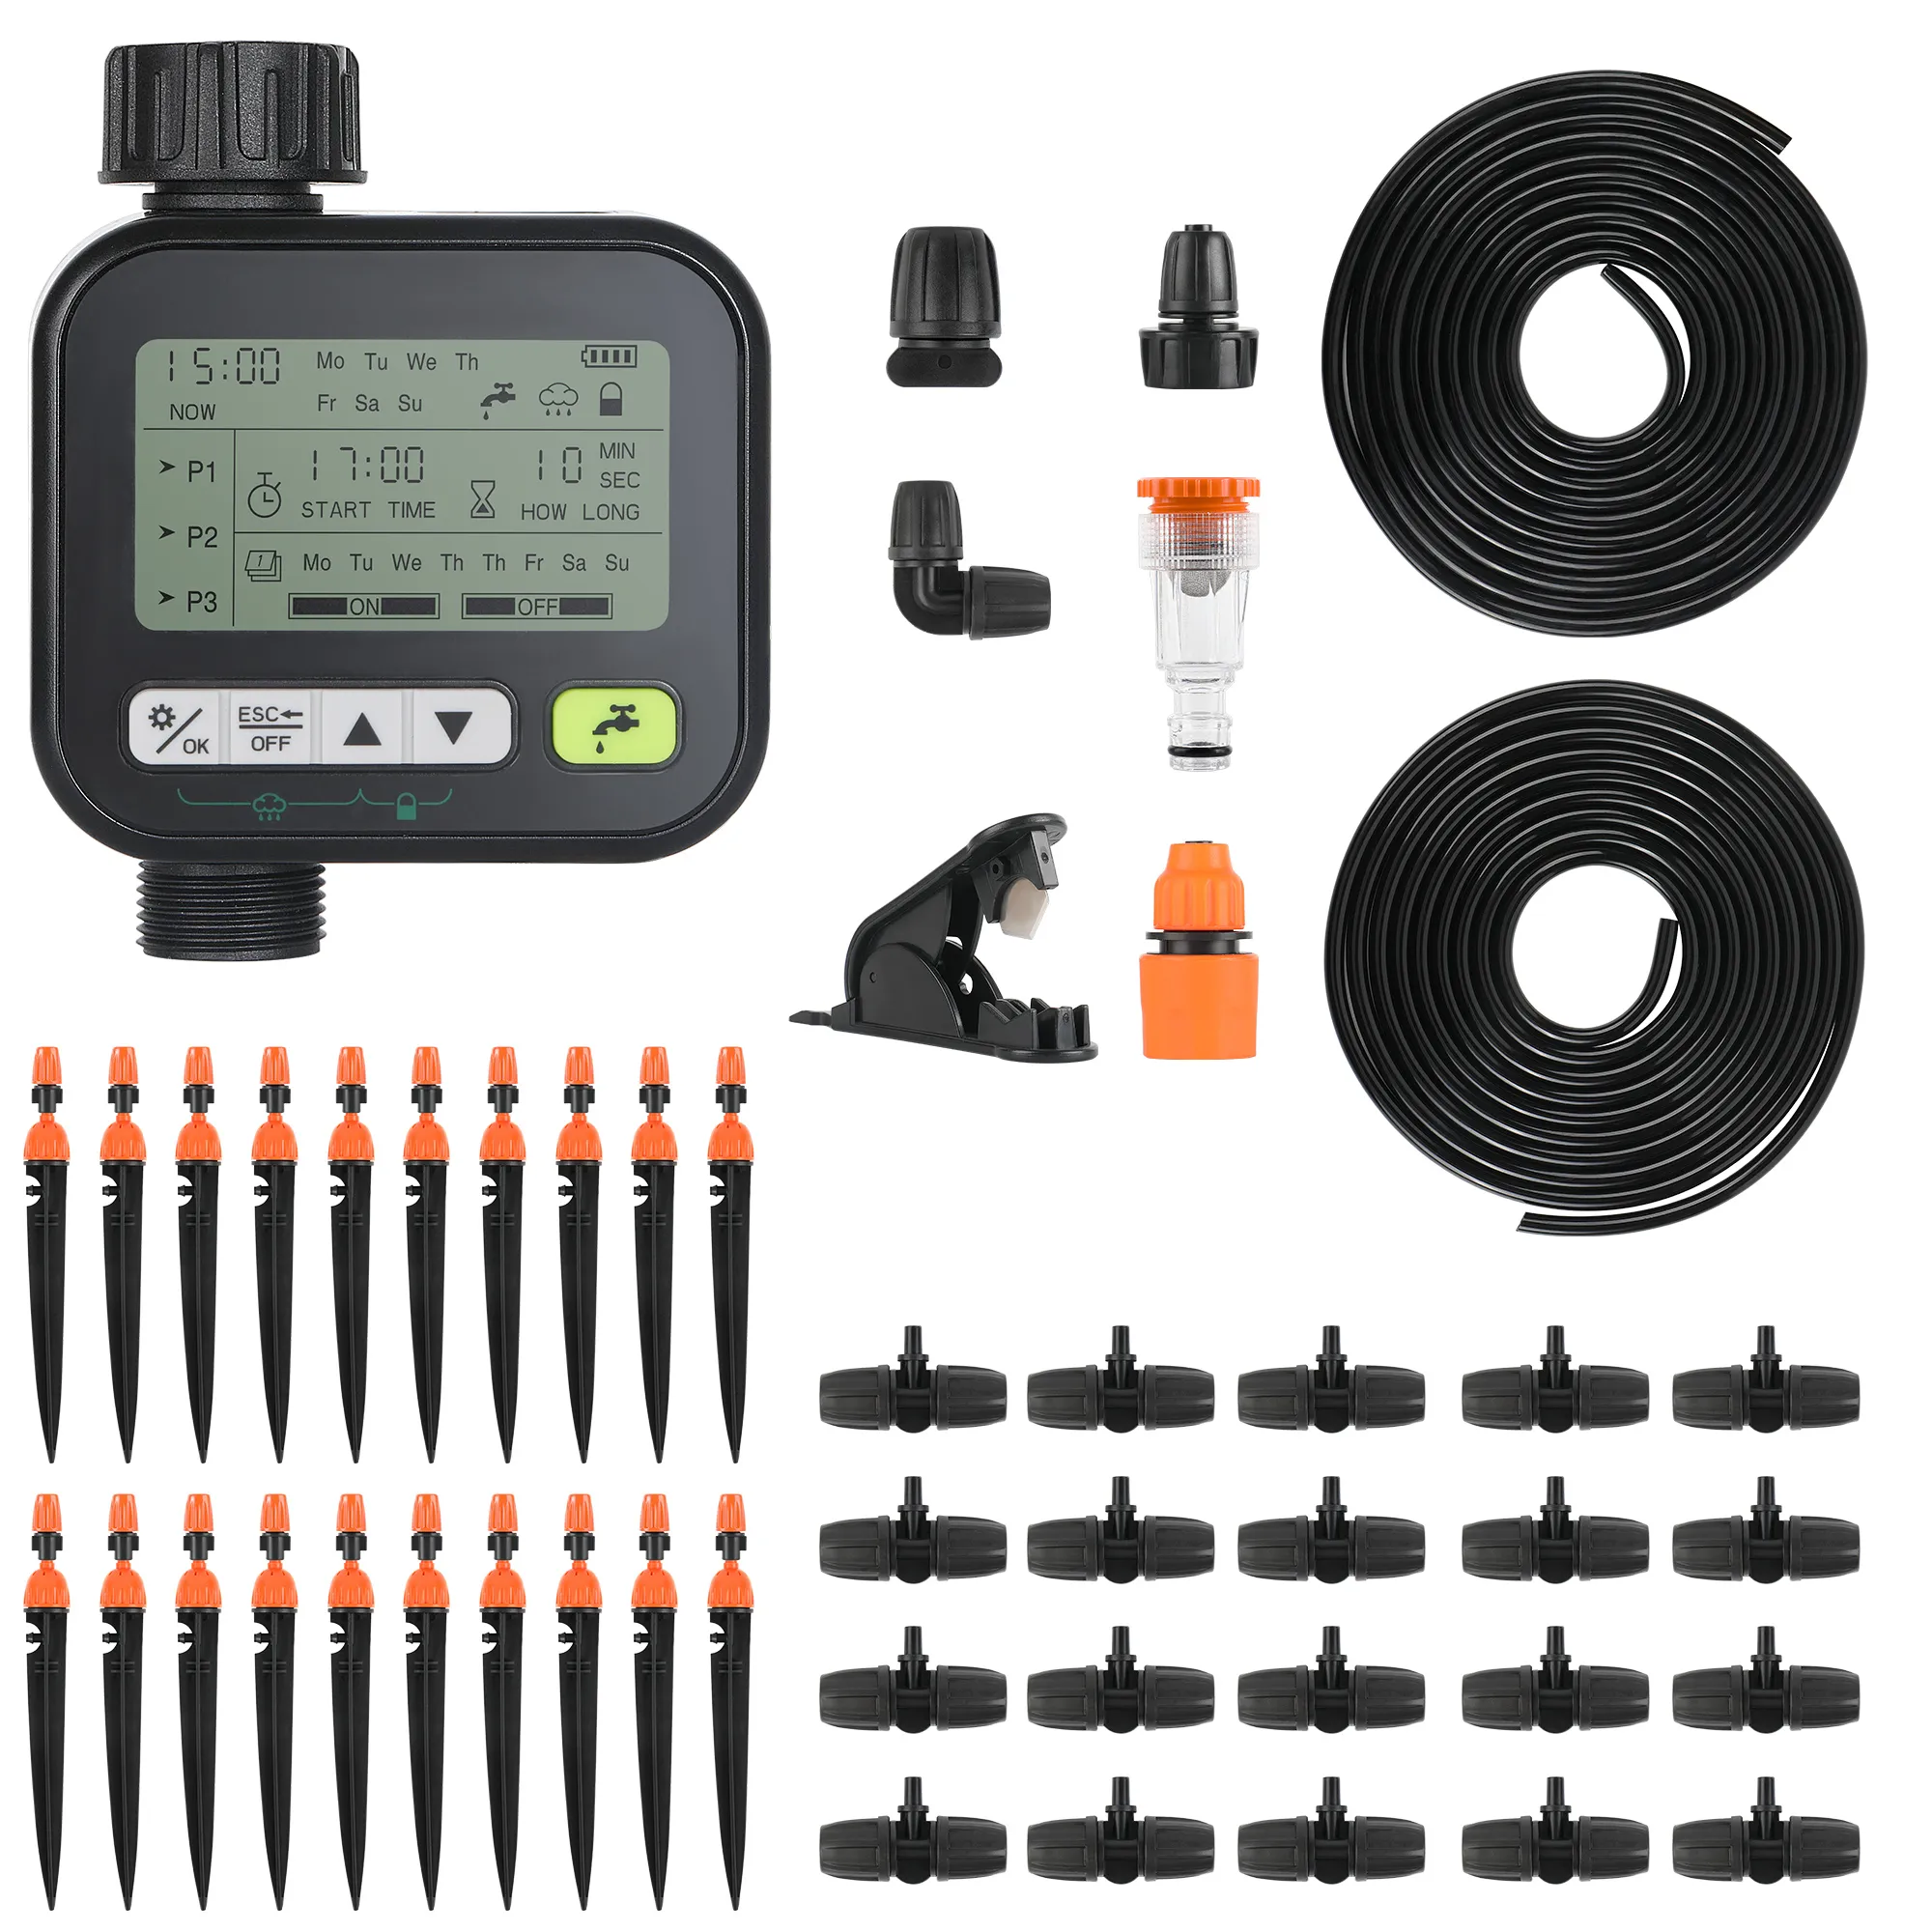 Water timer with 30m hoses and 20 nozzles for drip irrigation or spray